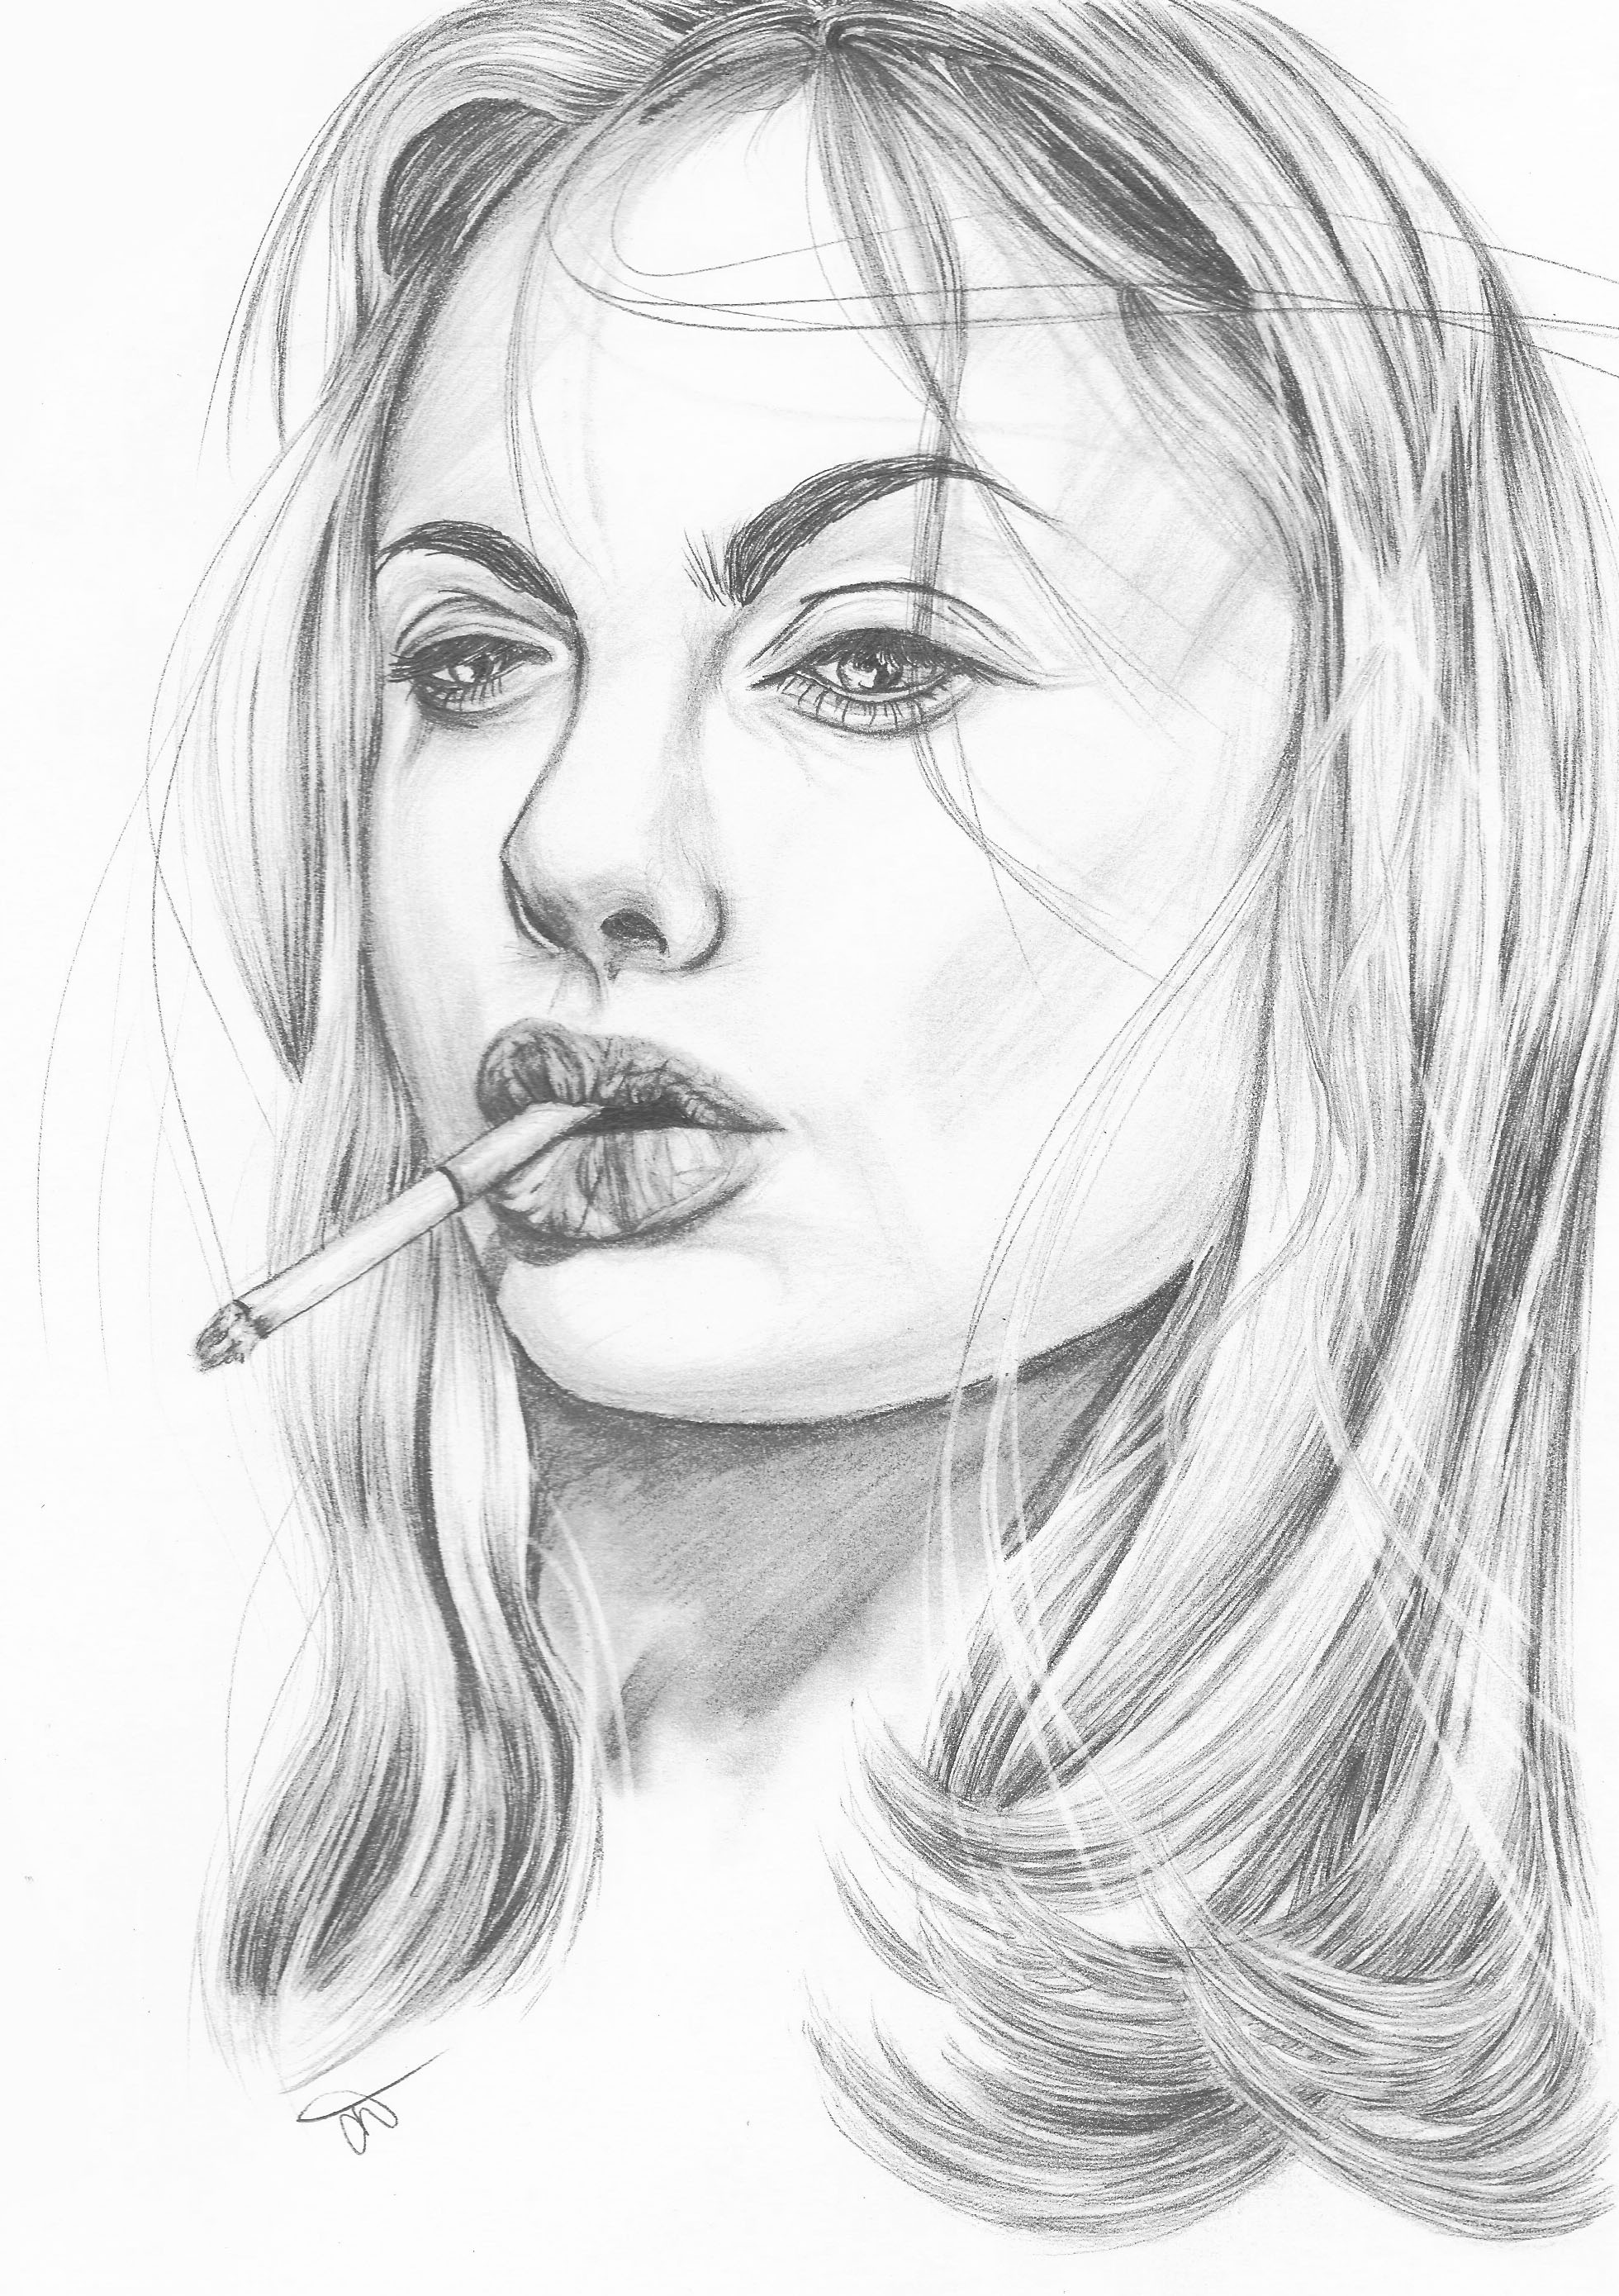 angeline jolie from girl interrupted pencil drawing